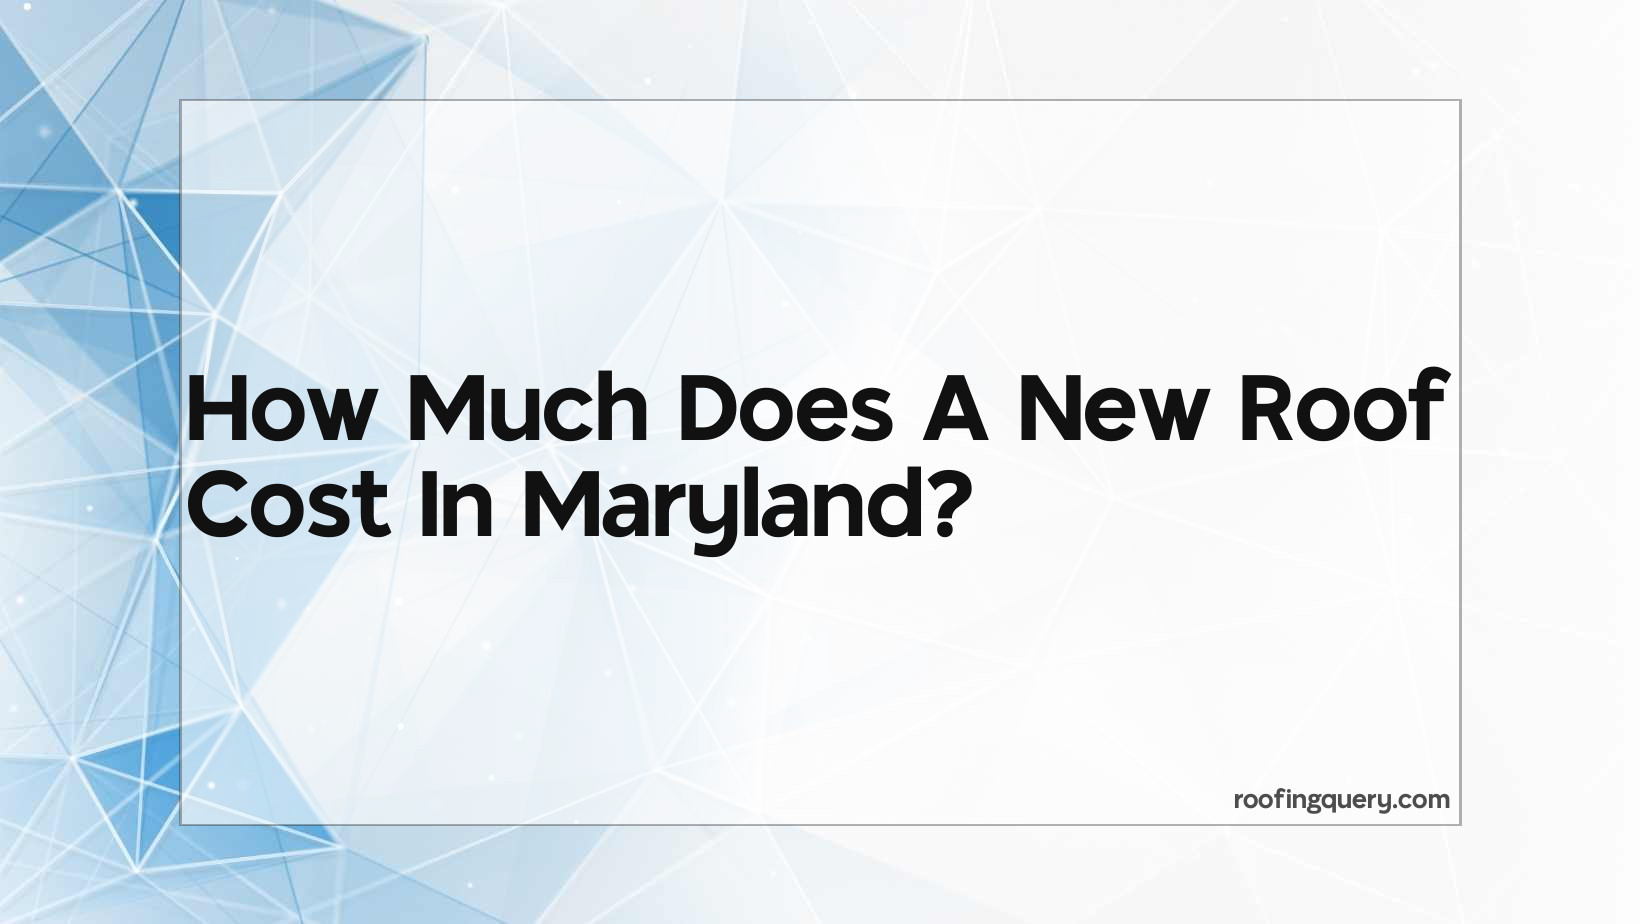 How Much Does A New Roof Cost In Maryland?